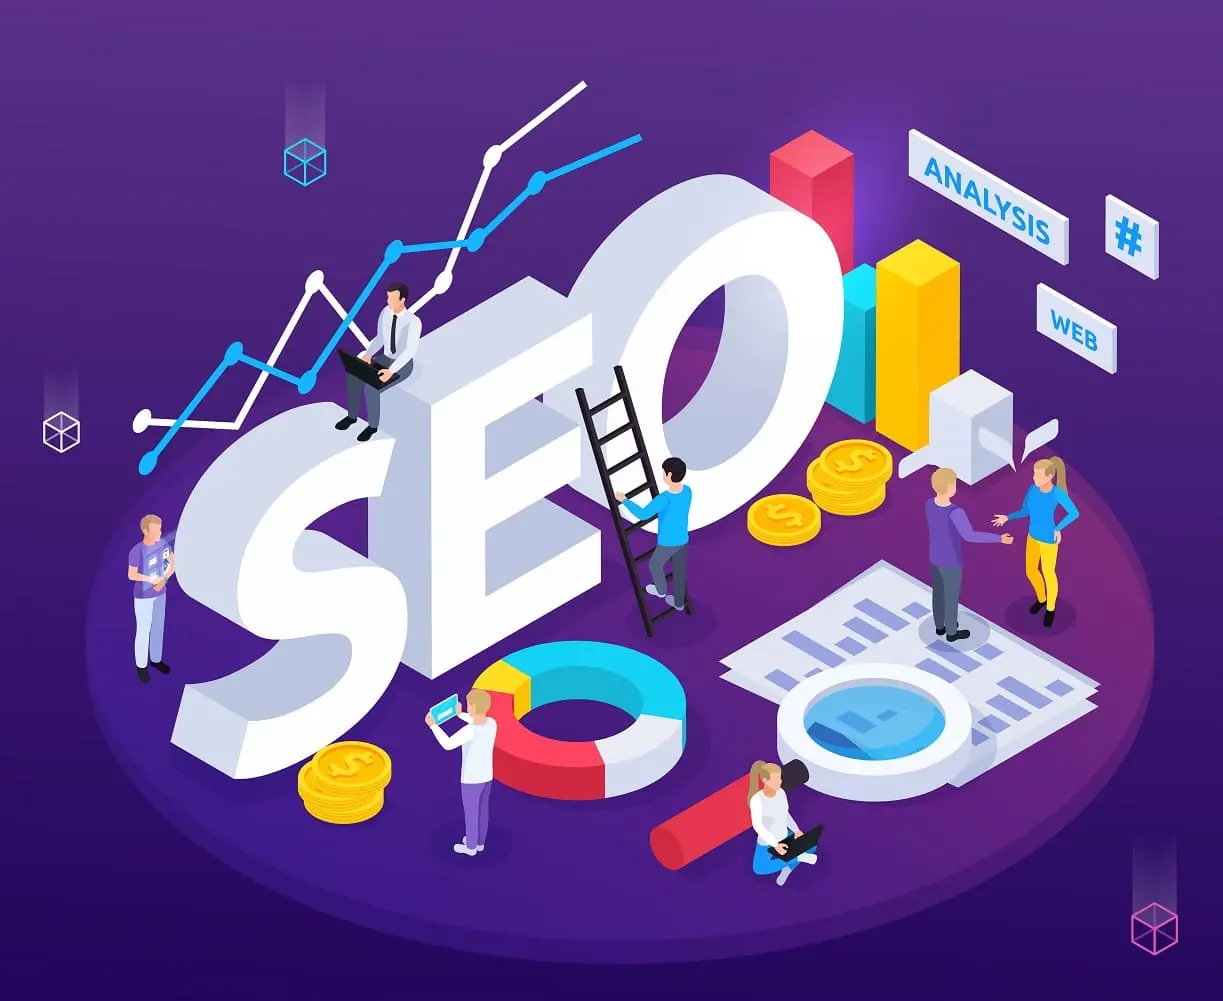 SEO Tools Every Marketer Should Use